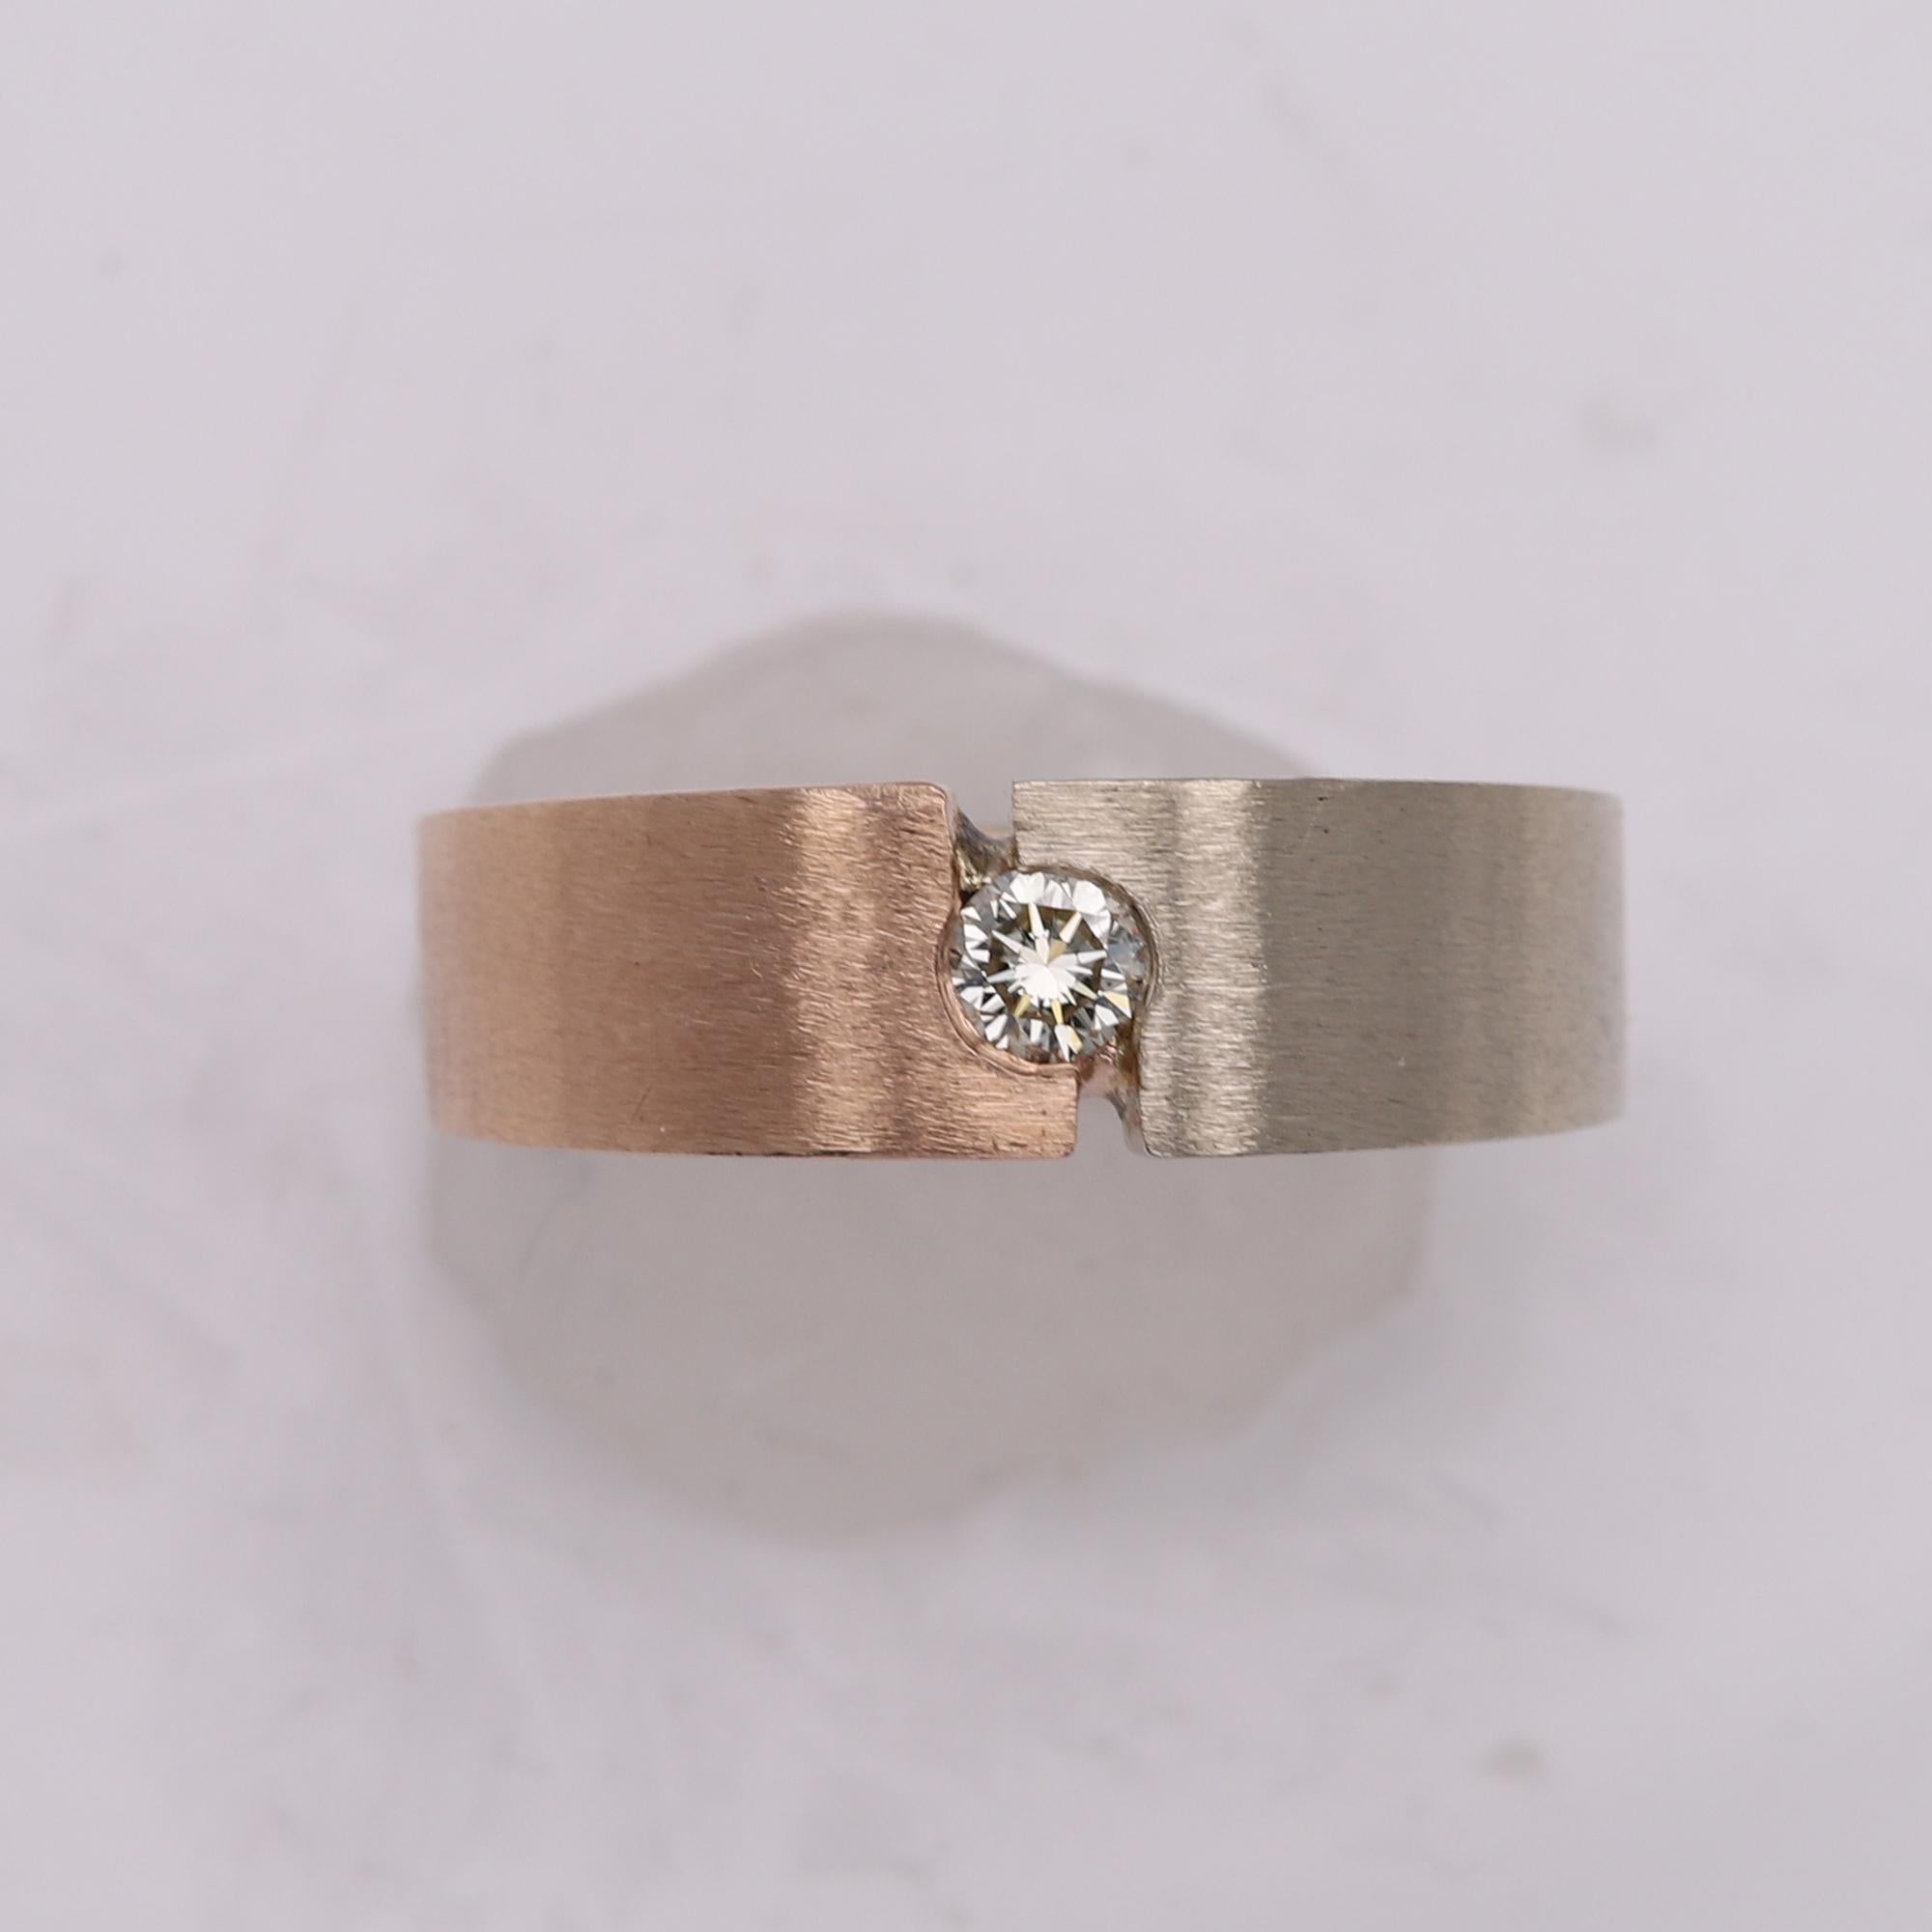 Pre- owned in great condition -as new
14k Two tone - Rose and White Gold
brilliant center natural diamond H-SI-VS very shiny diamond
diamond size 0.40 mm / 0.25 carat
Total gold weight 13 grams
brushed finish - very cool.
Band width on top approx.